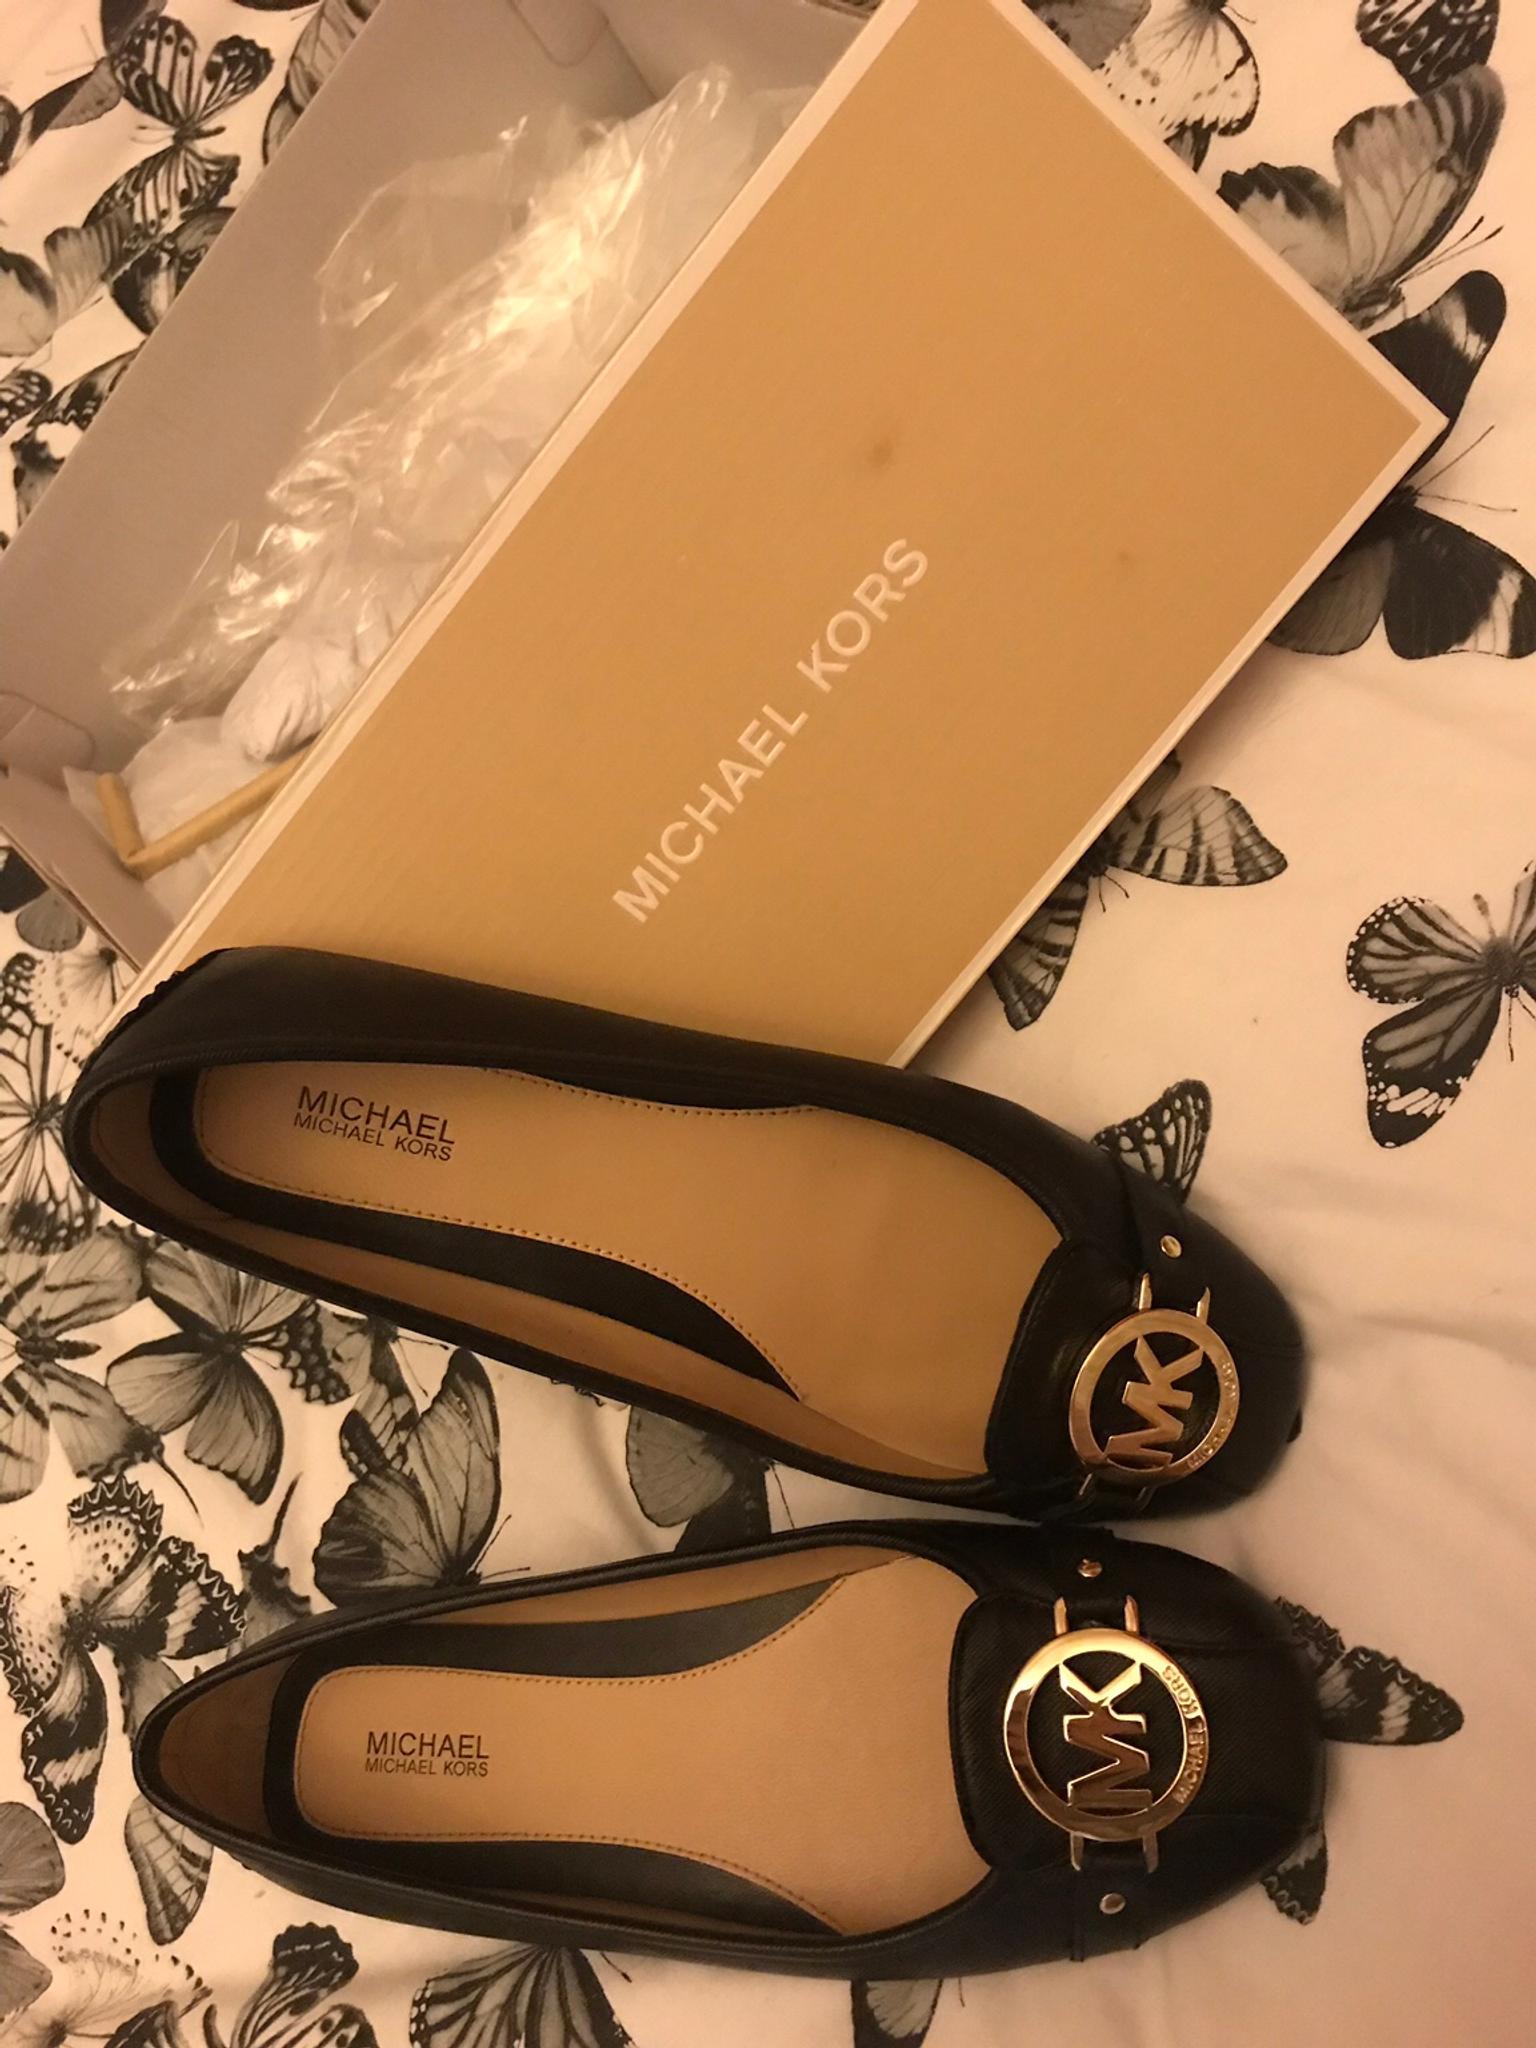 Michael Kors dolly shoes - size 5 in 